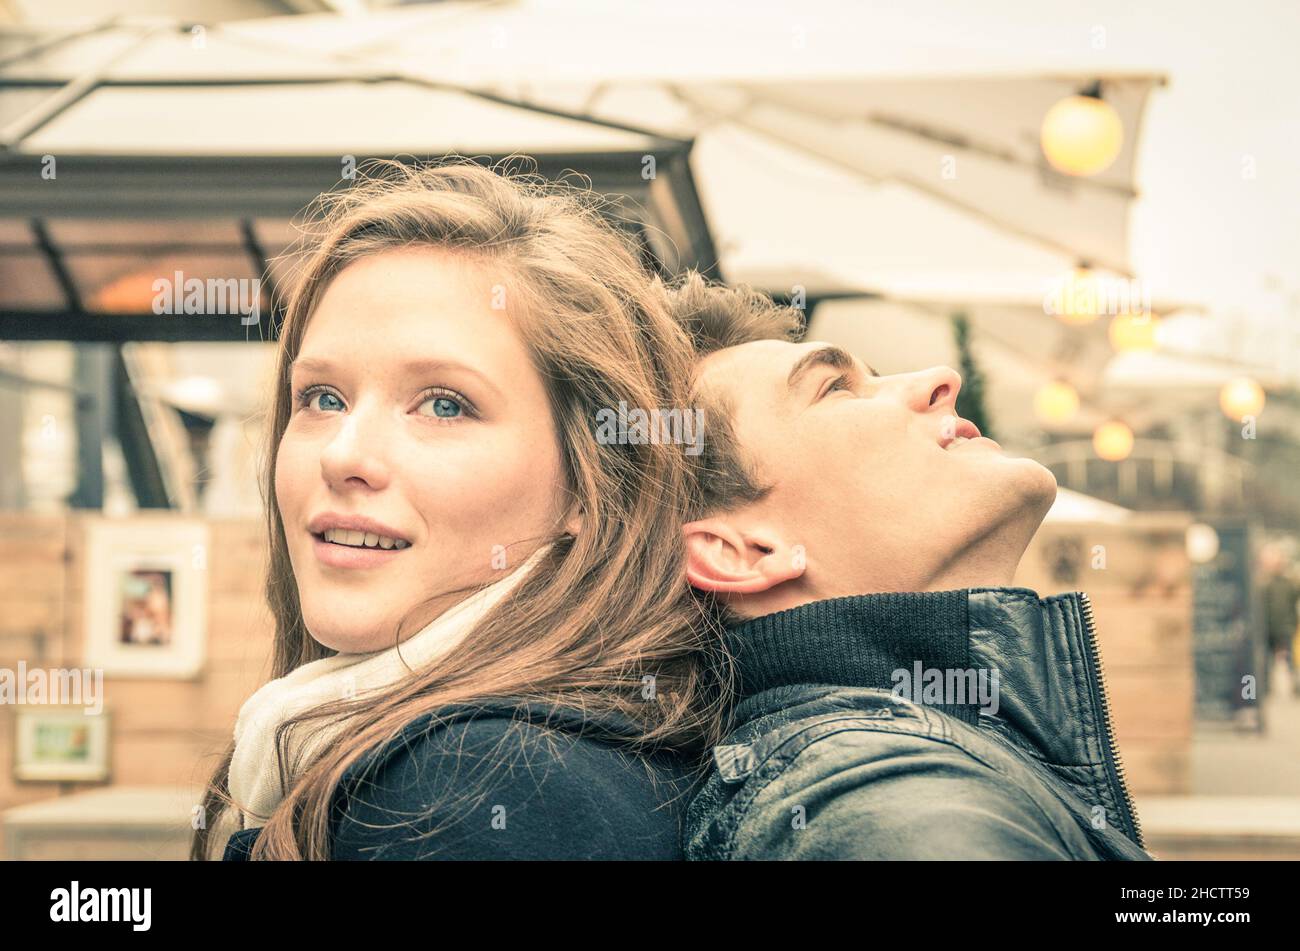 Couple of lovers at the beginning of a love story - Concept of happiness with ectstatic feelings in a very special moment of young people lifestyle Stock Photo